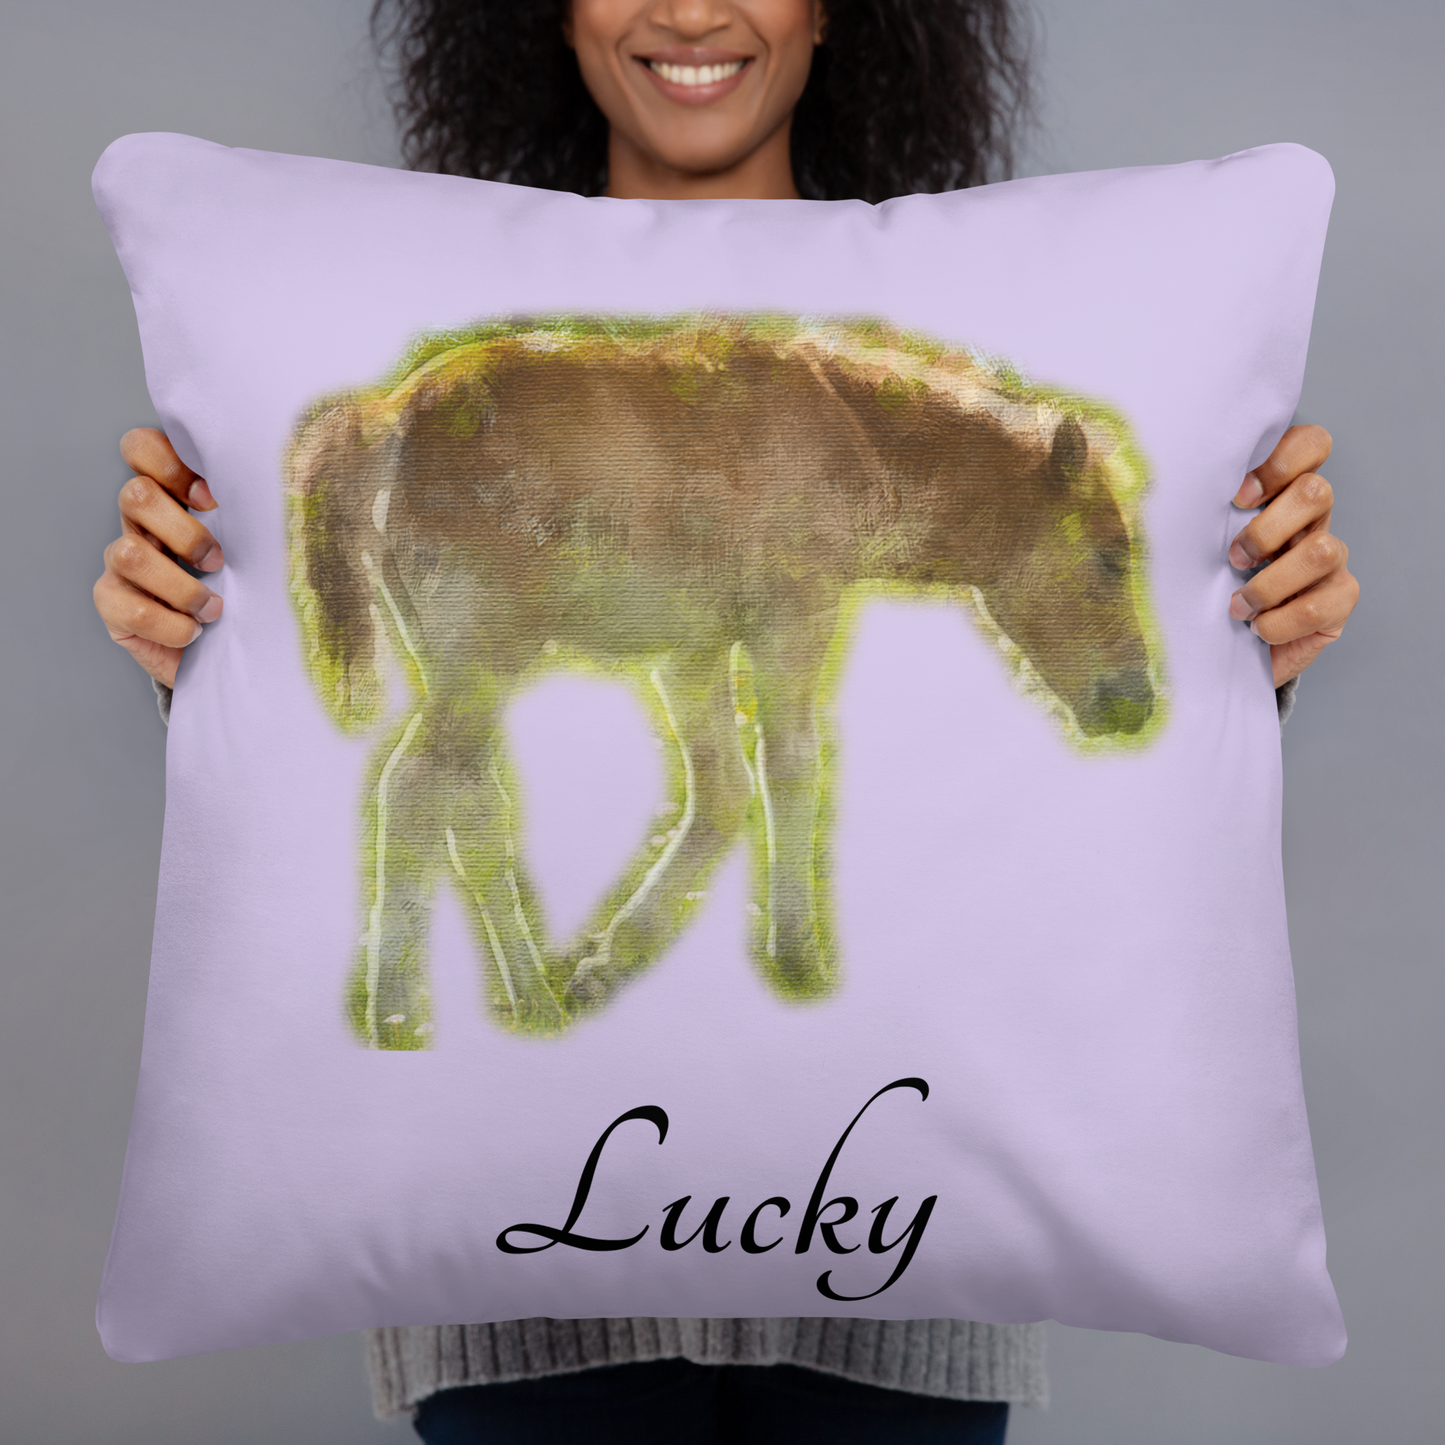 Hand Drawn Horse || Horse Square Throw Pillow - Oil Painting  - Personalized; Personalized with your horse